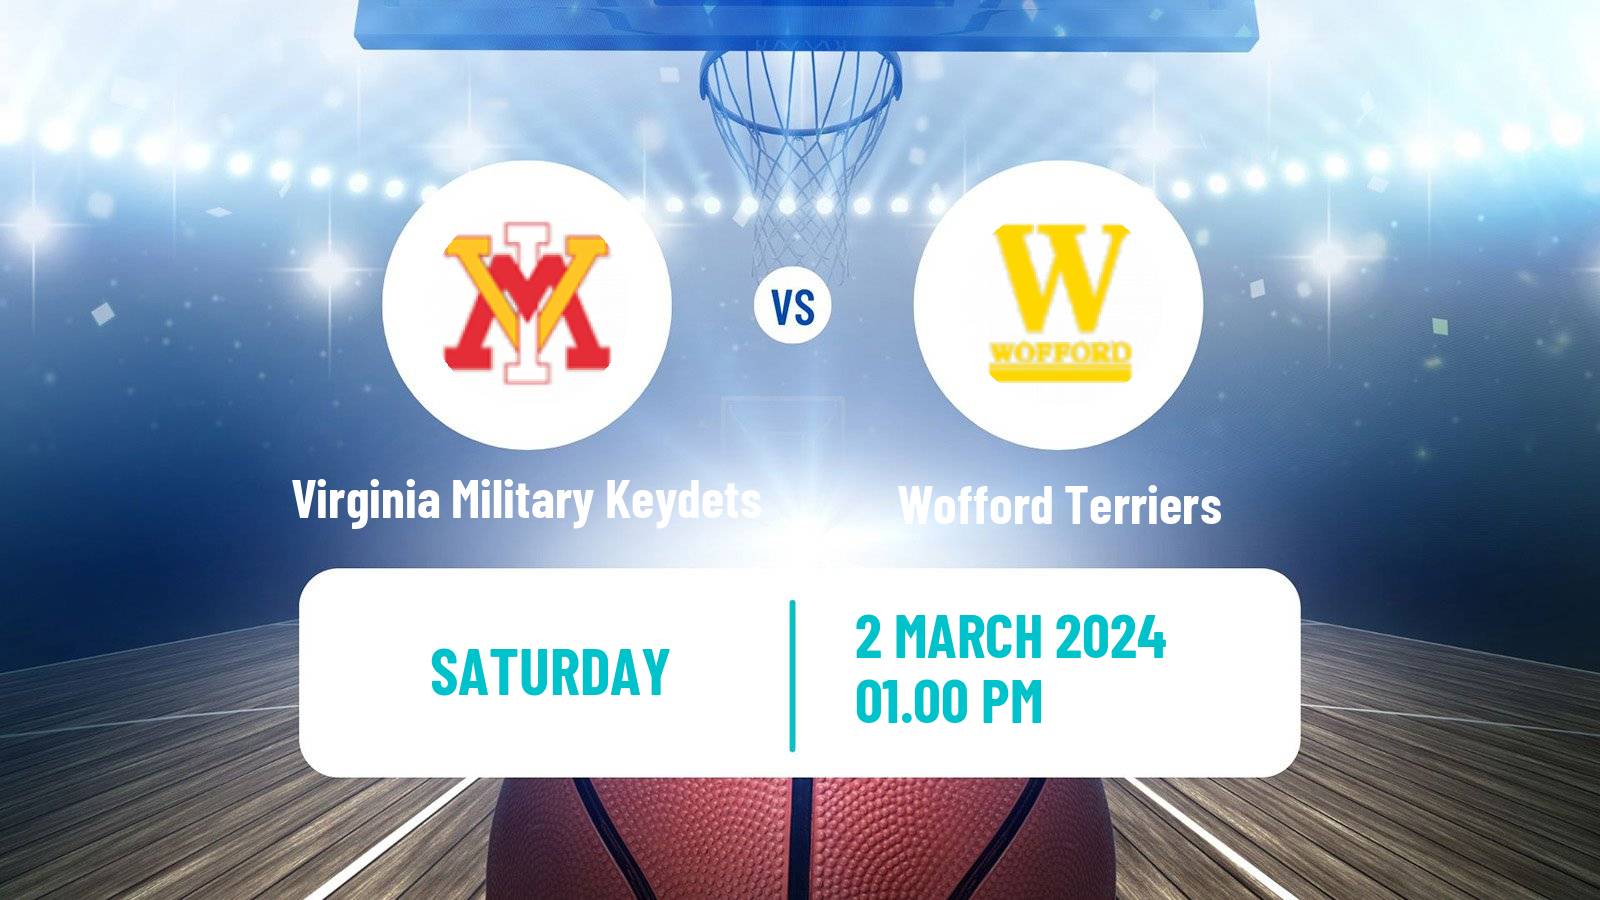 Basketball NCAA College Basketball Virginia Military Keydets - Wofford Terriers